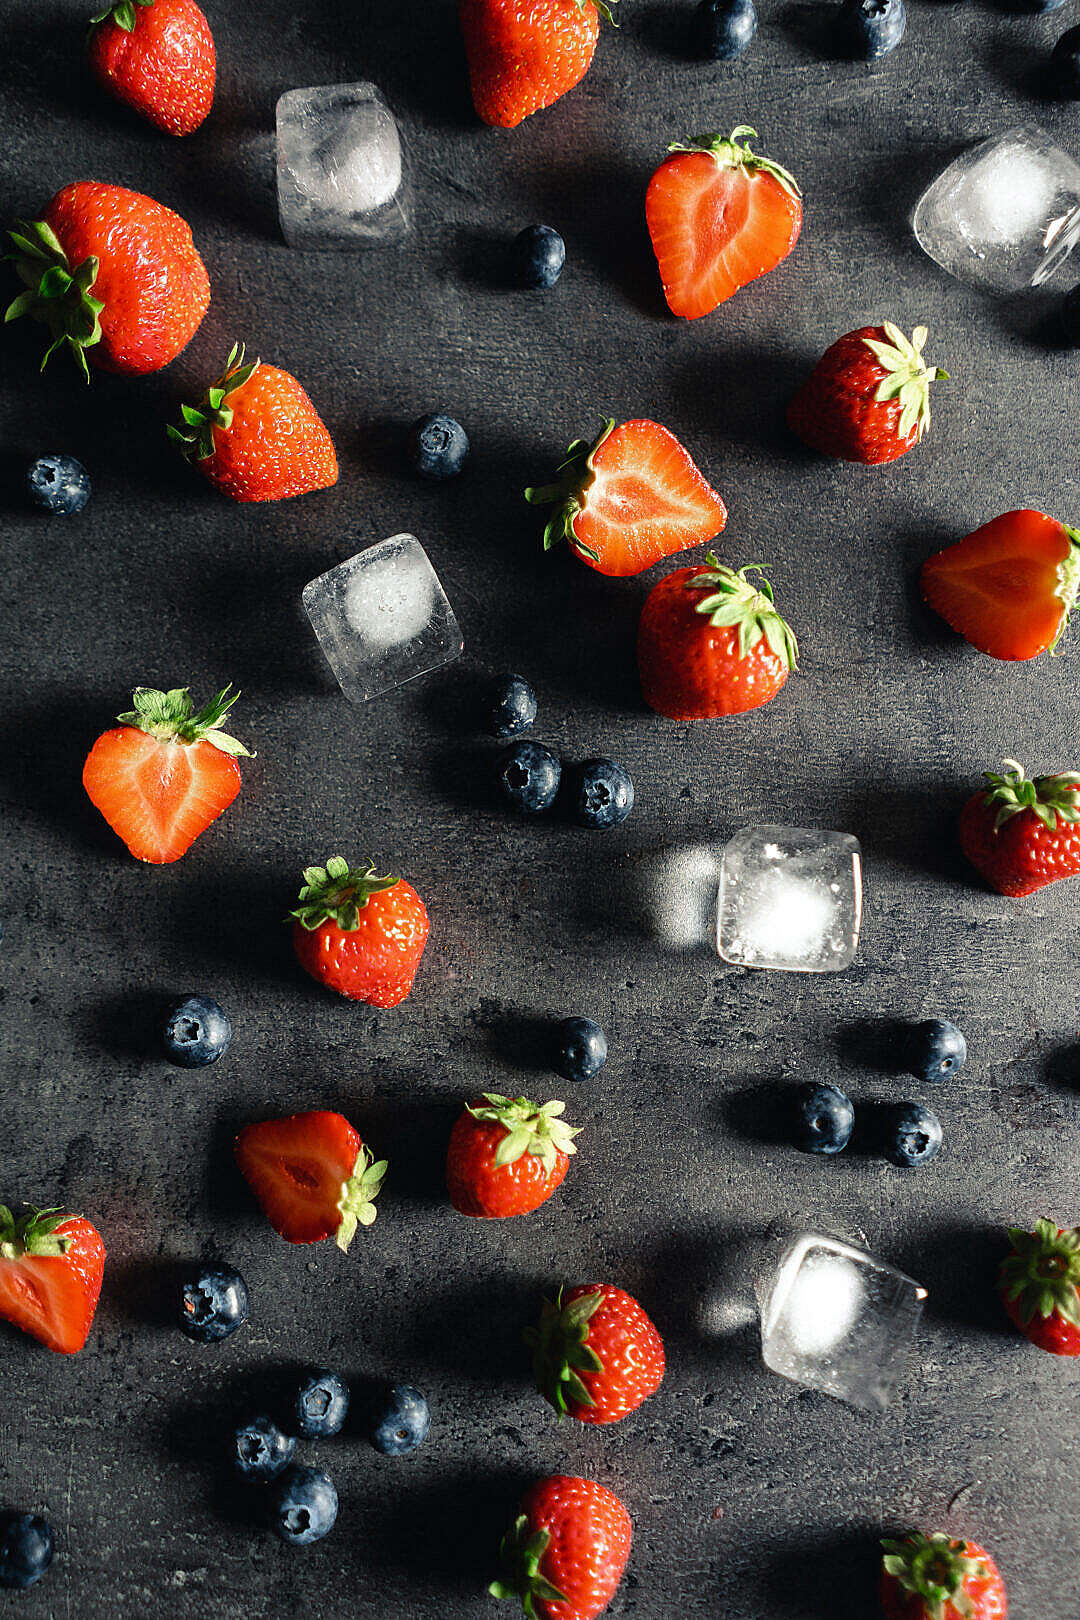 Download Strawberries and Blueberries FREE Stock Photo